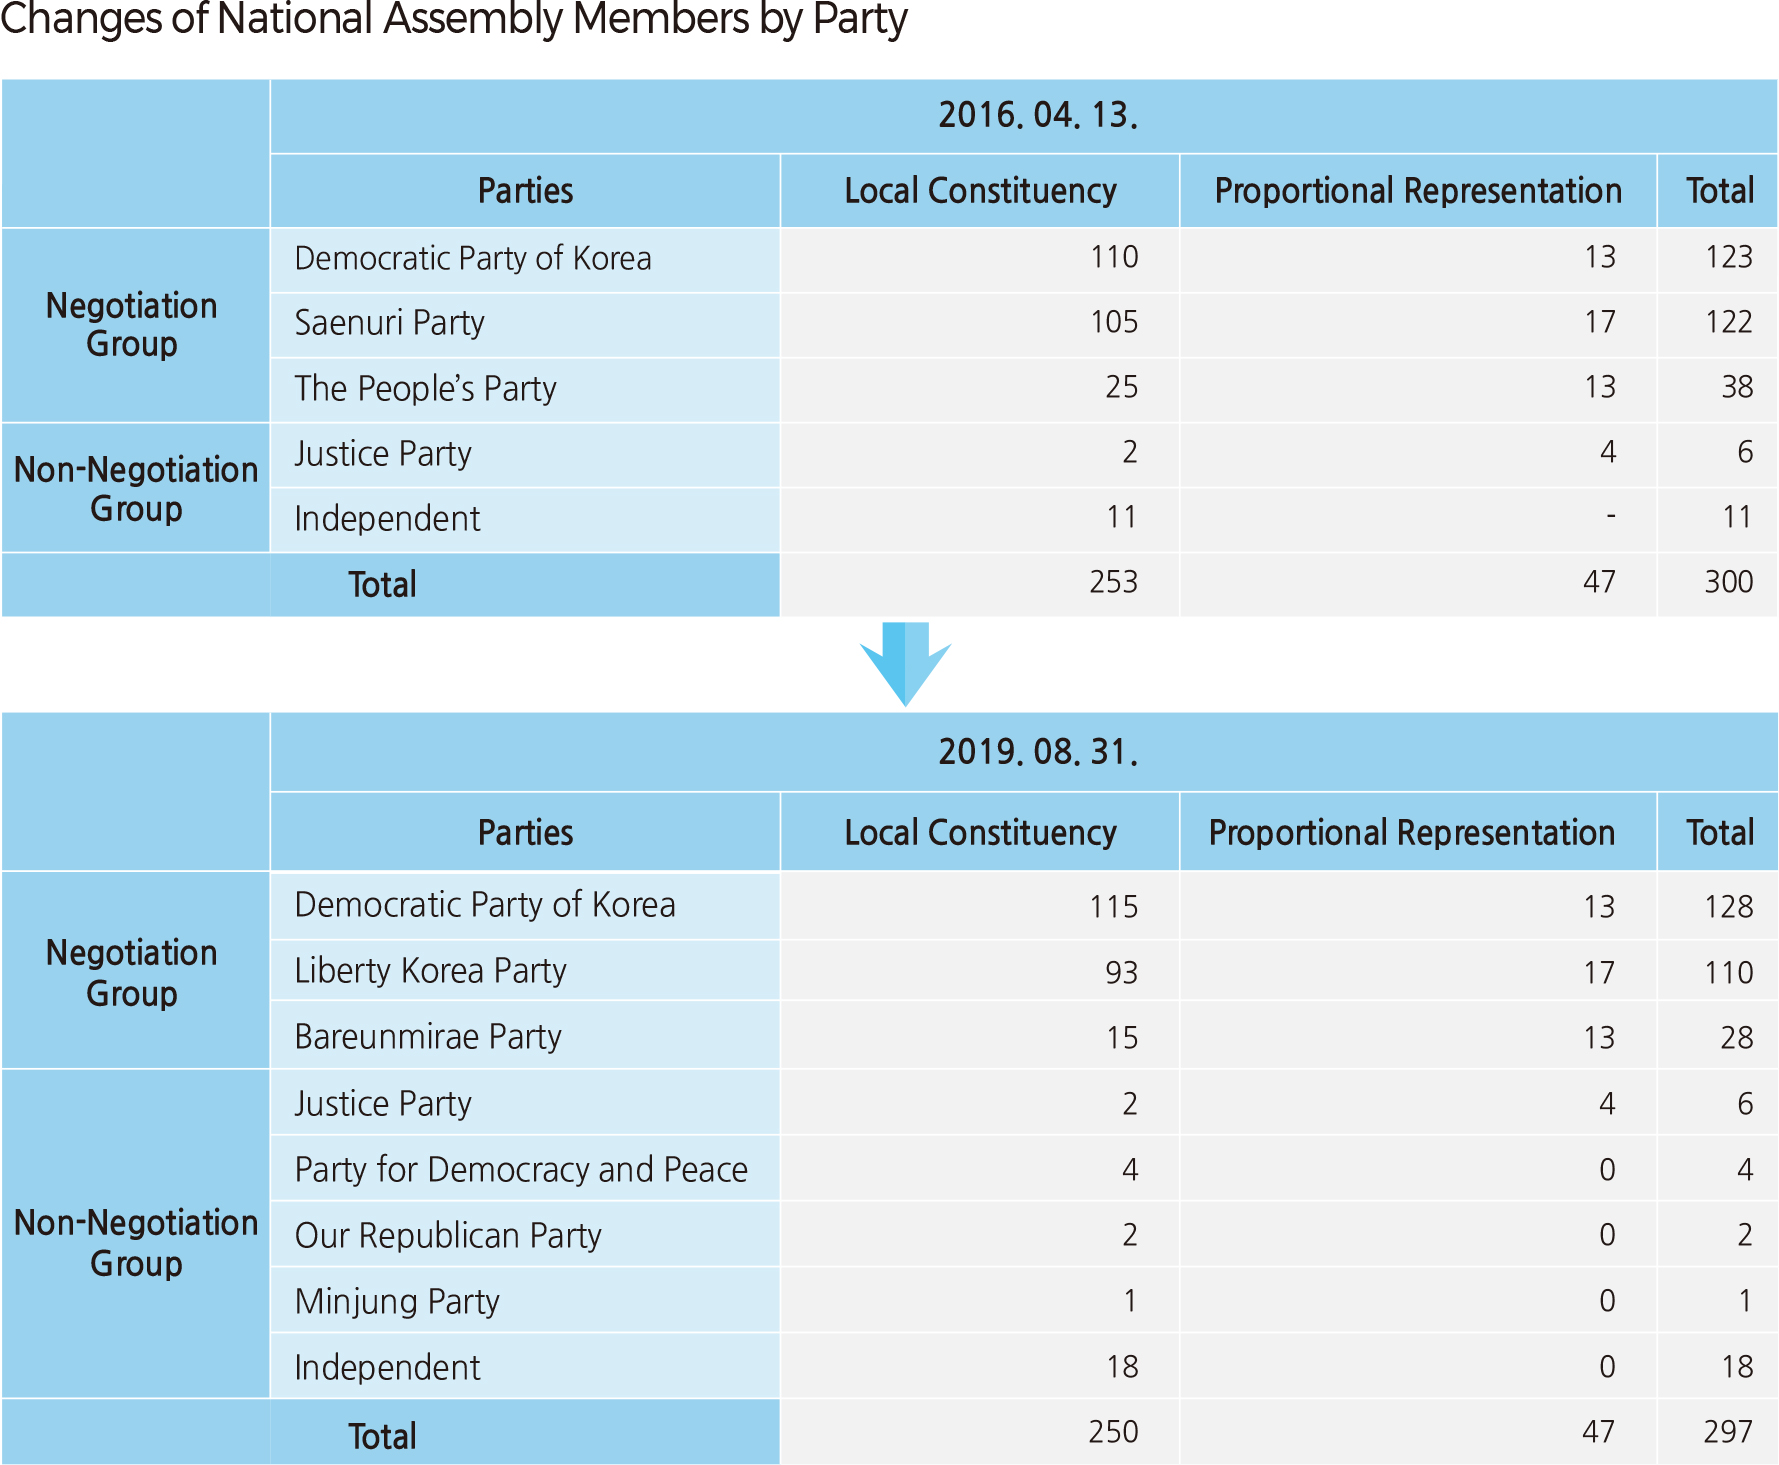 Changes of National Assembly Members by Party